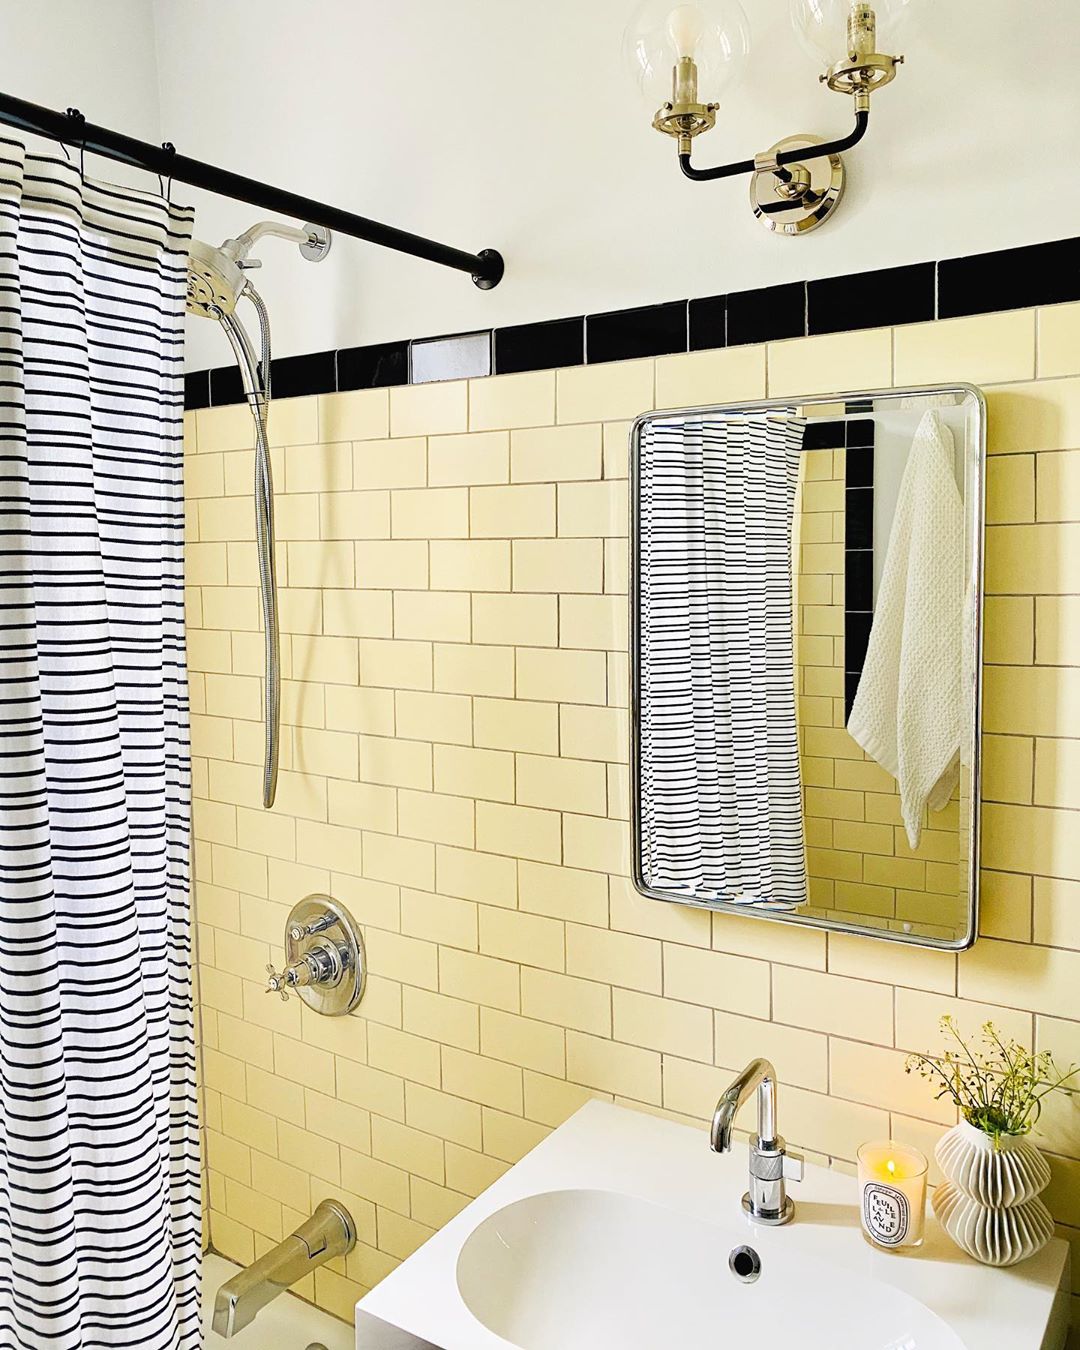 updated bathroom walls with yellow subway tiles and new light fixture photo by Instagram user @ipatrickdesign